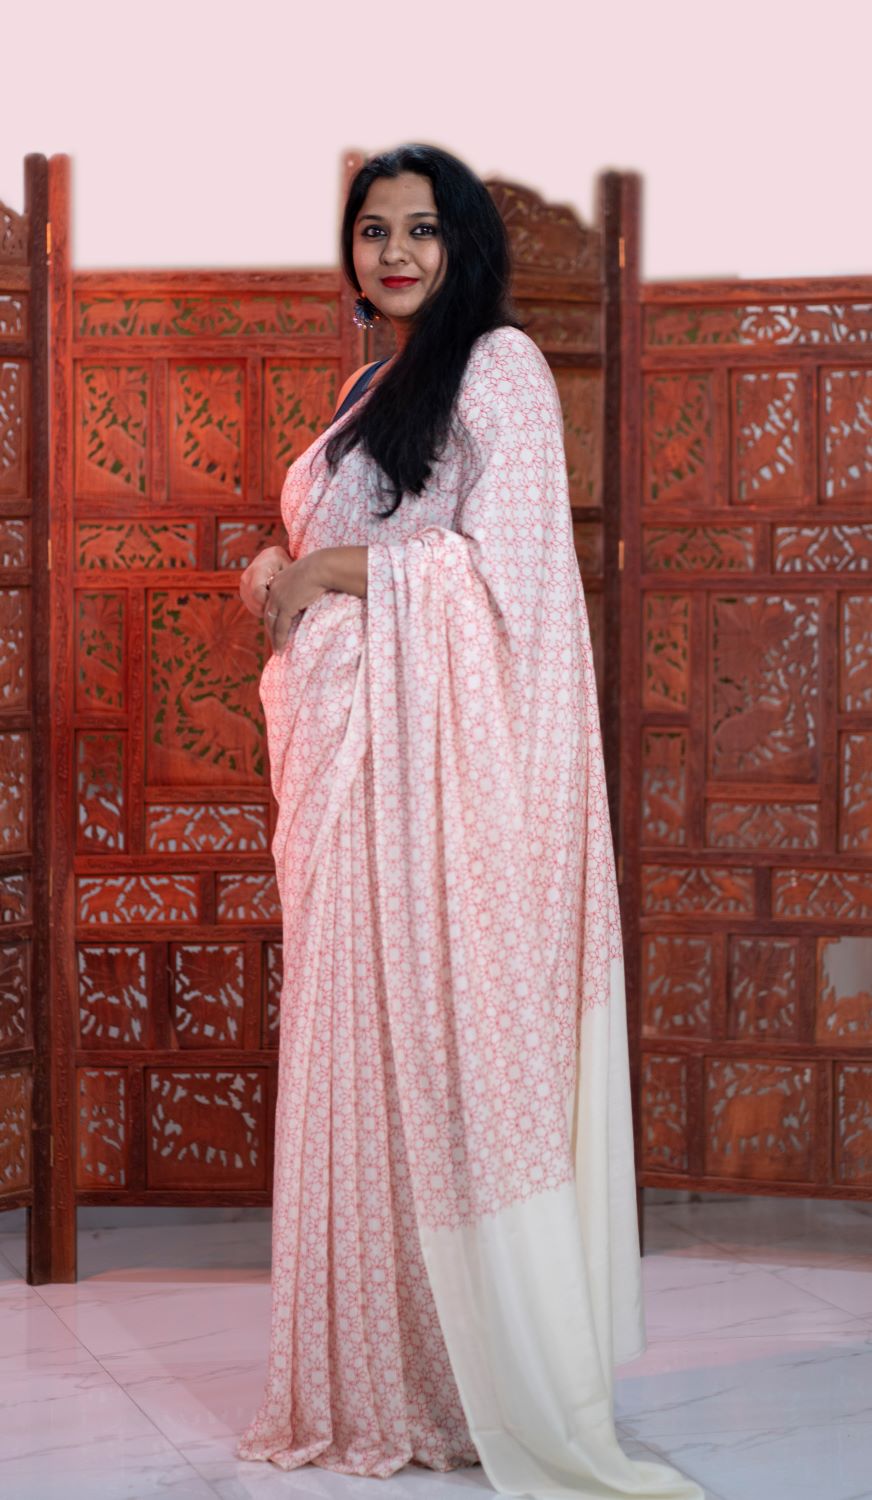 I Want the Fairy Tale- Printed Modal Silk Saree- White and Red